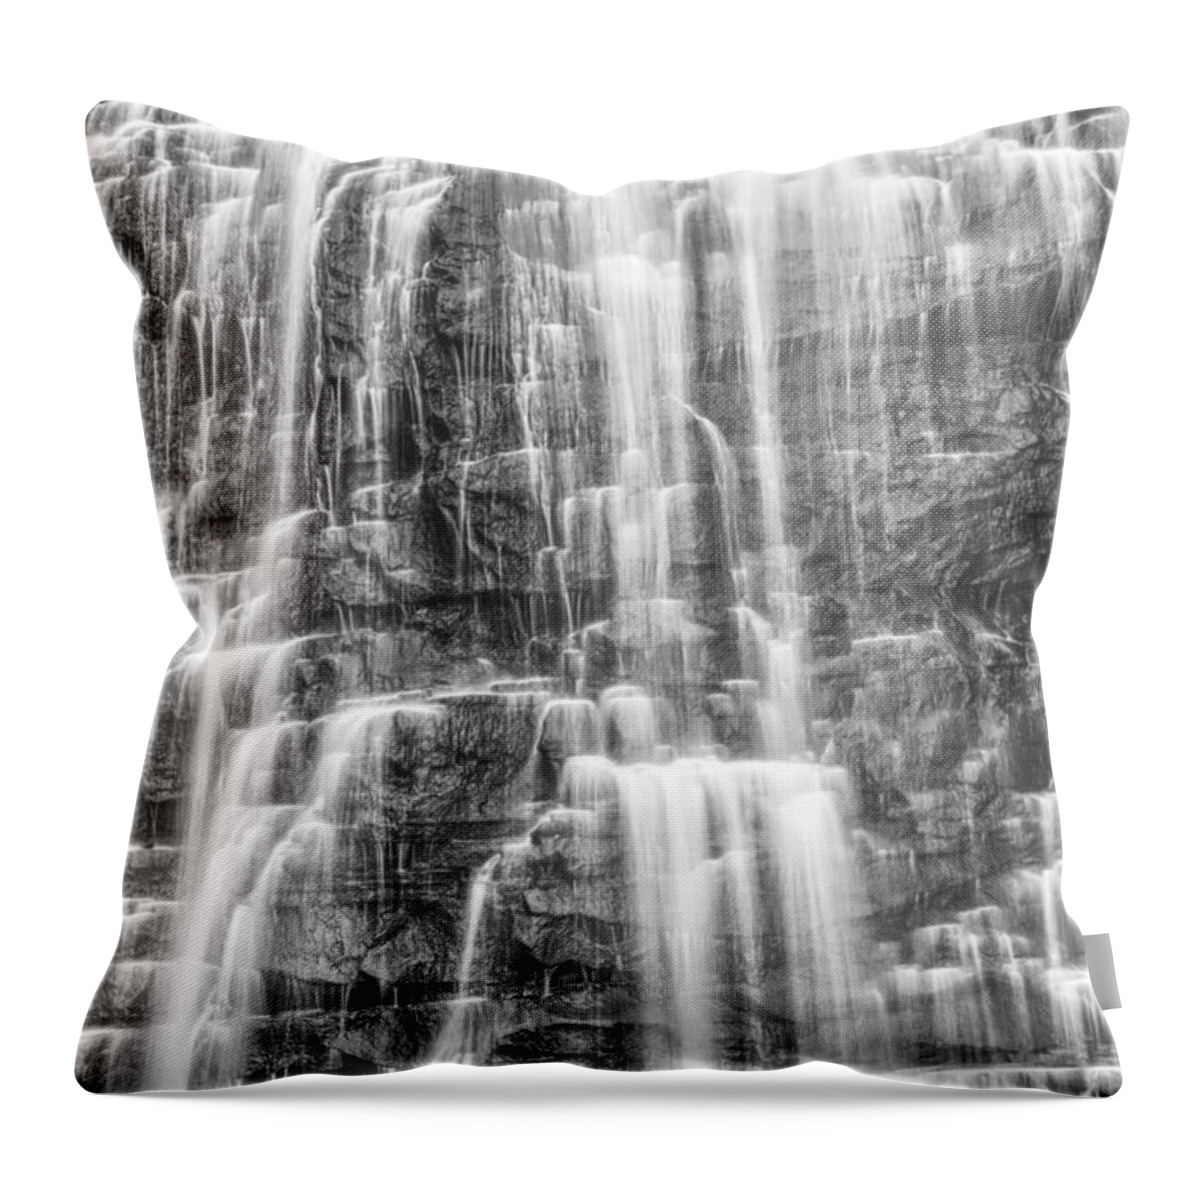 Tennessee Throw Pillow featuring the photograph Denny Cove Falls 9 by Phil Perkins